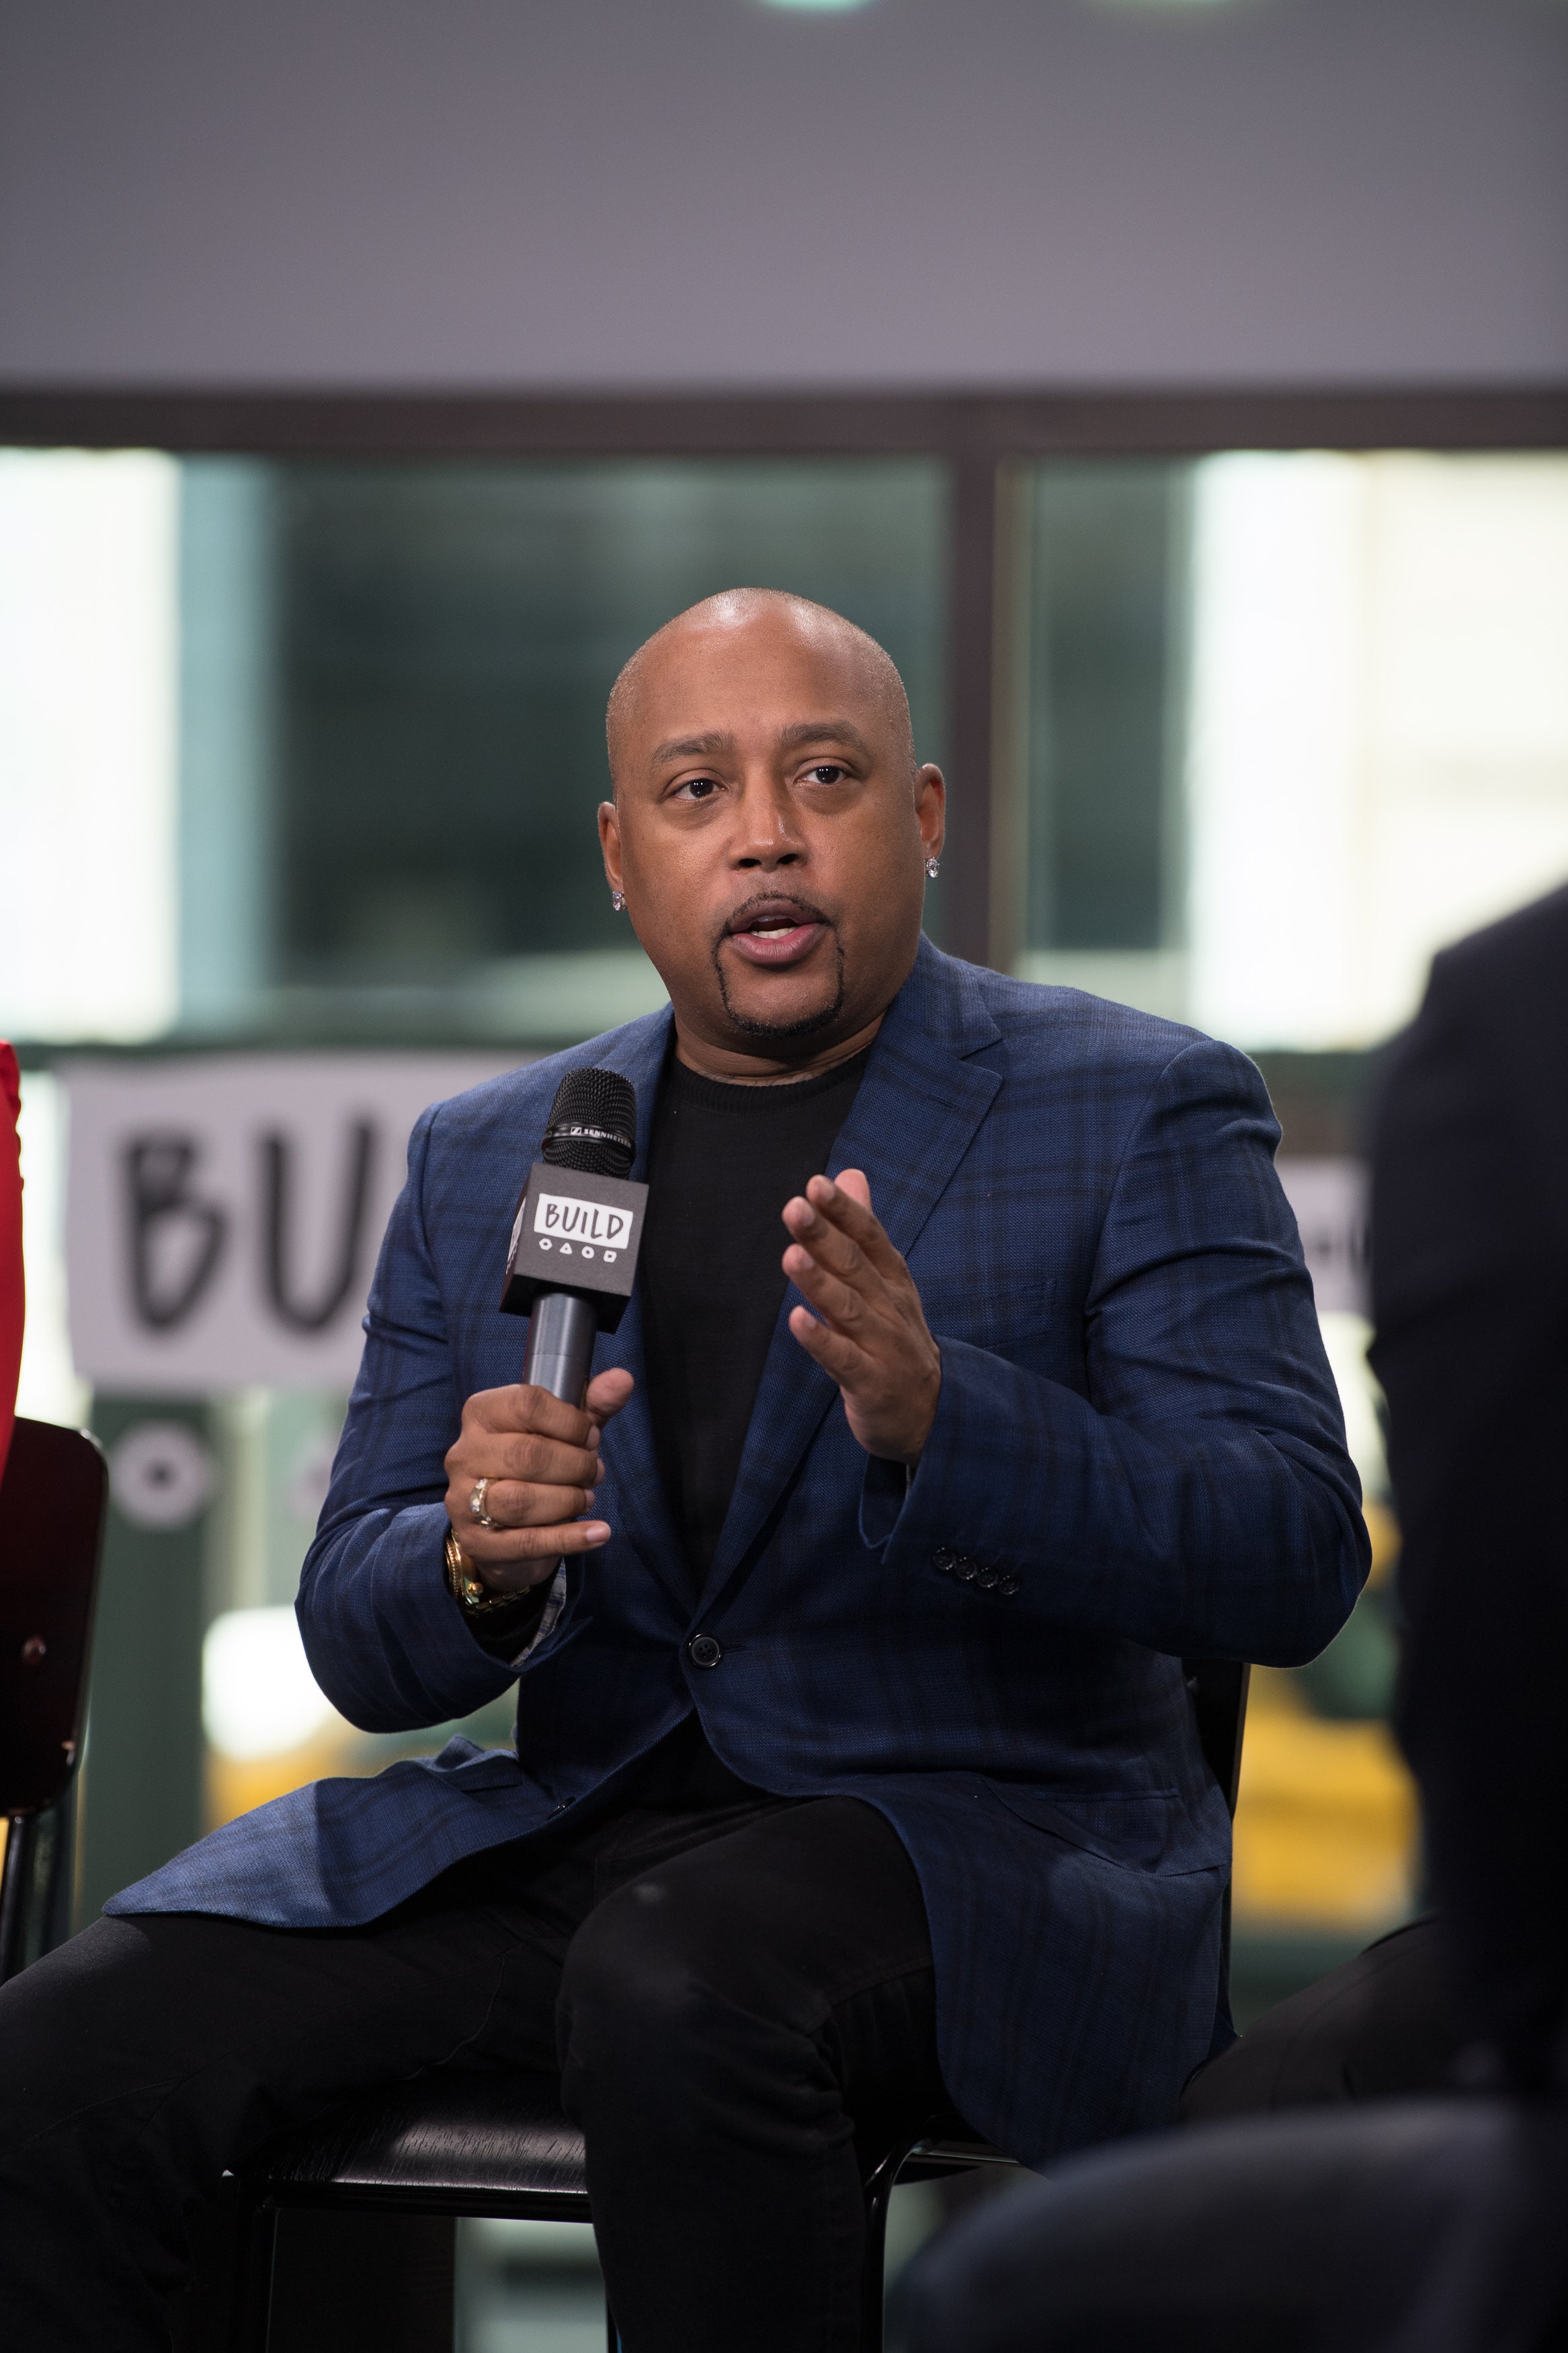 Shark Tank's Daymond John On Beating Thyroid Cancer: 'I Want To Walk My Daughters Down The Aisle'
